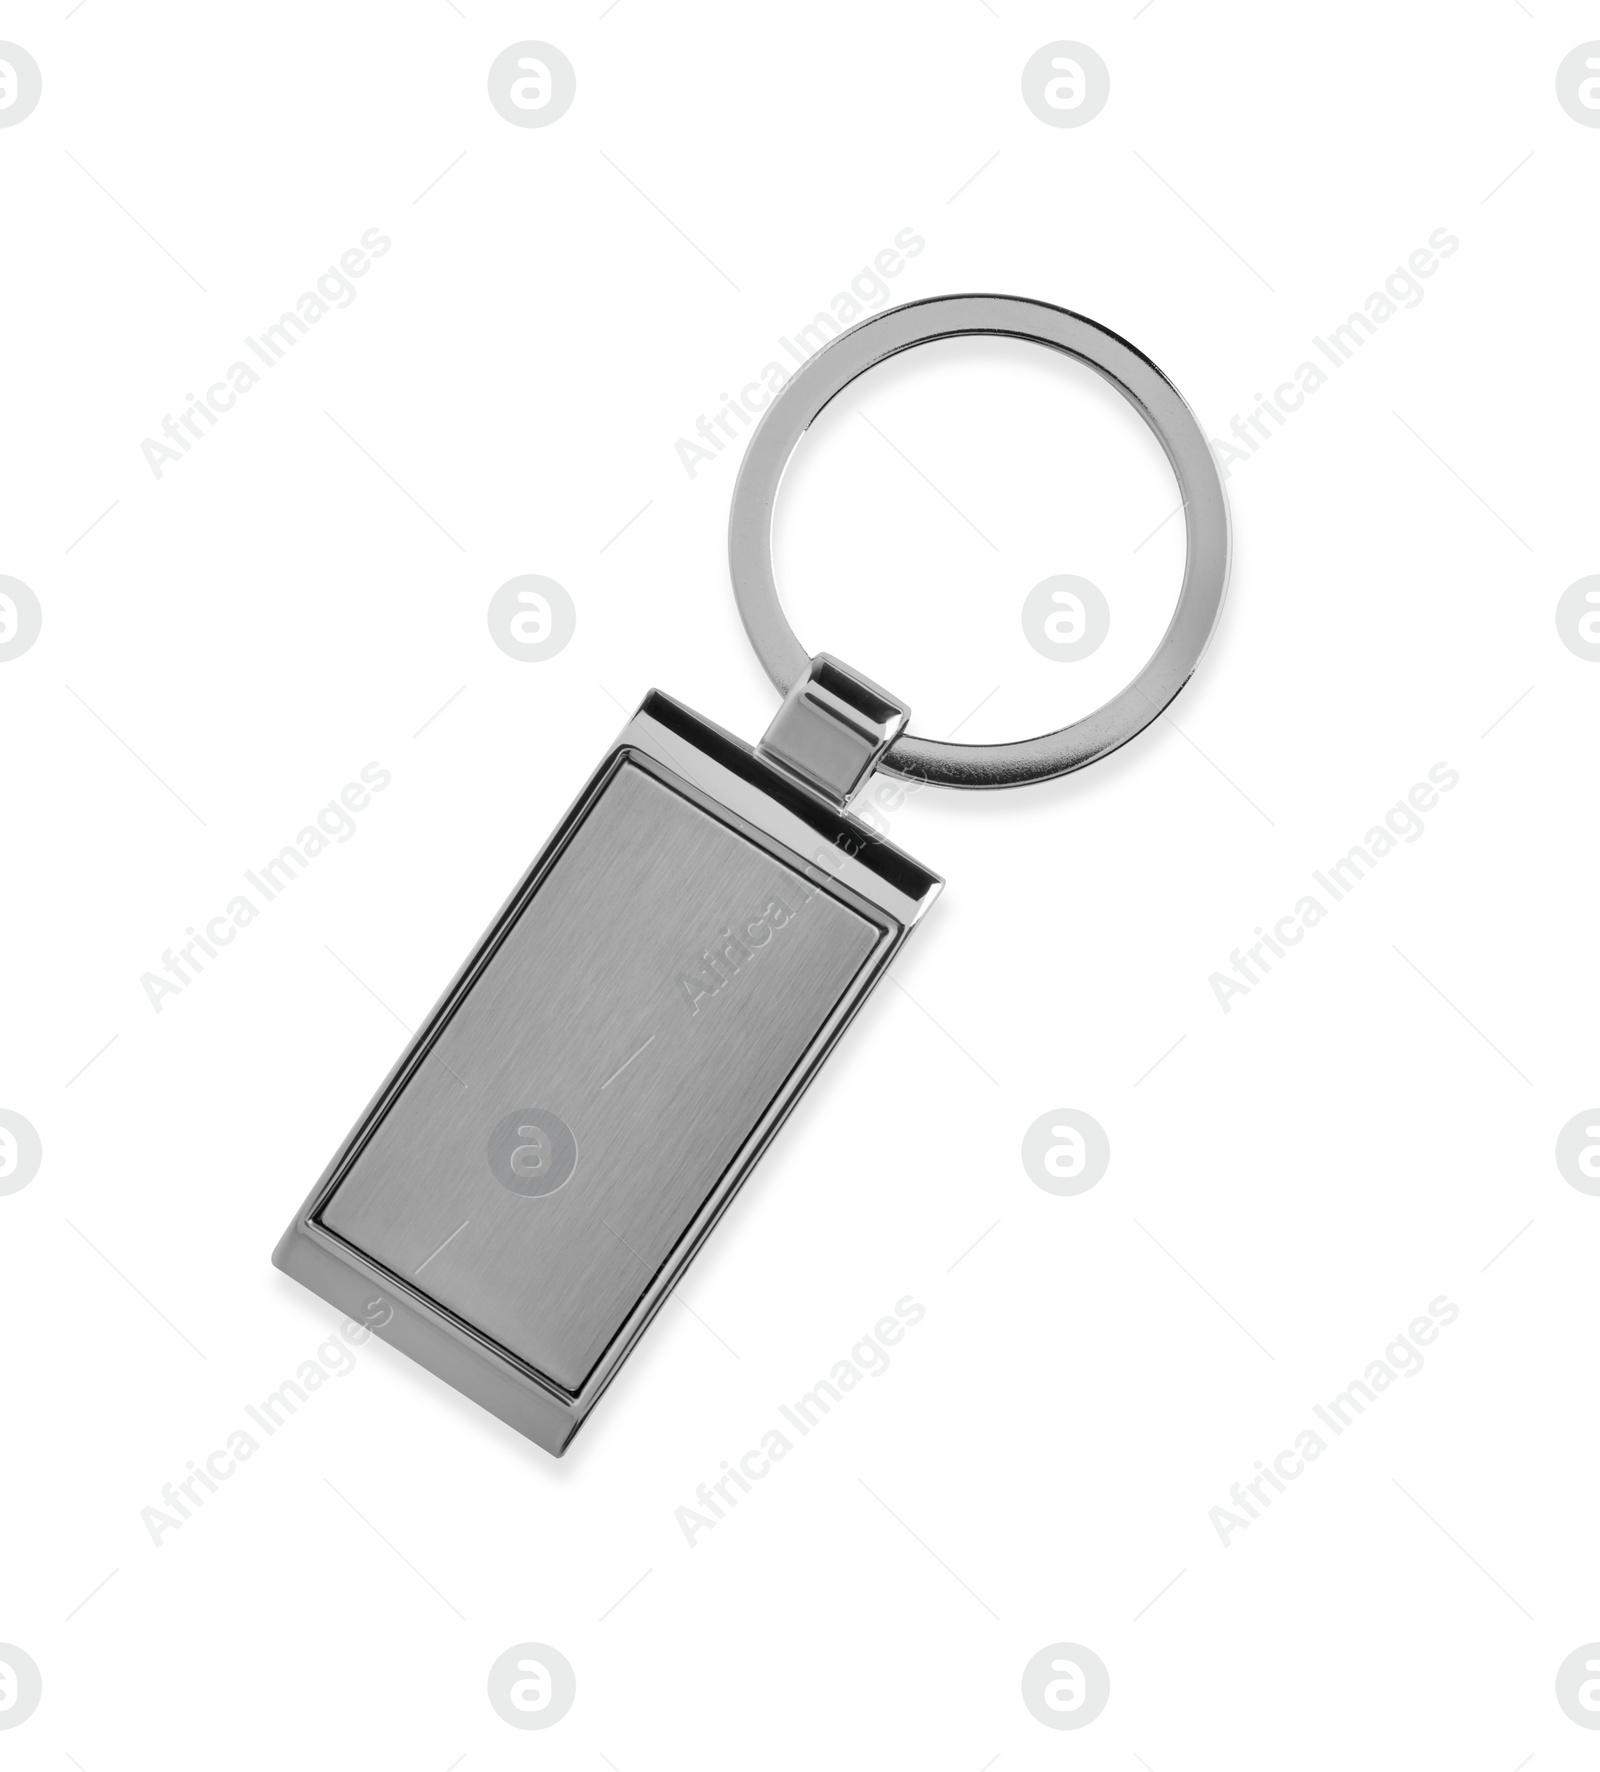 Photo of Metallic keychain isolated on white, top view